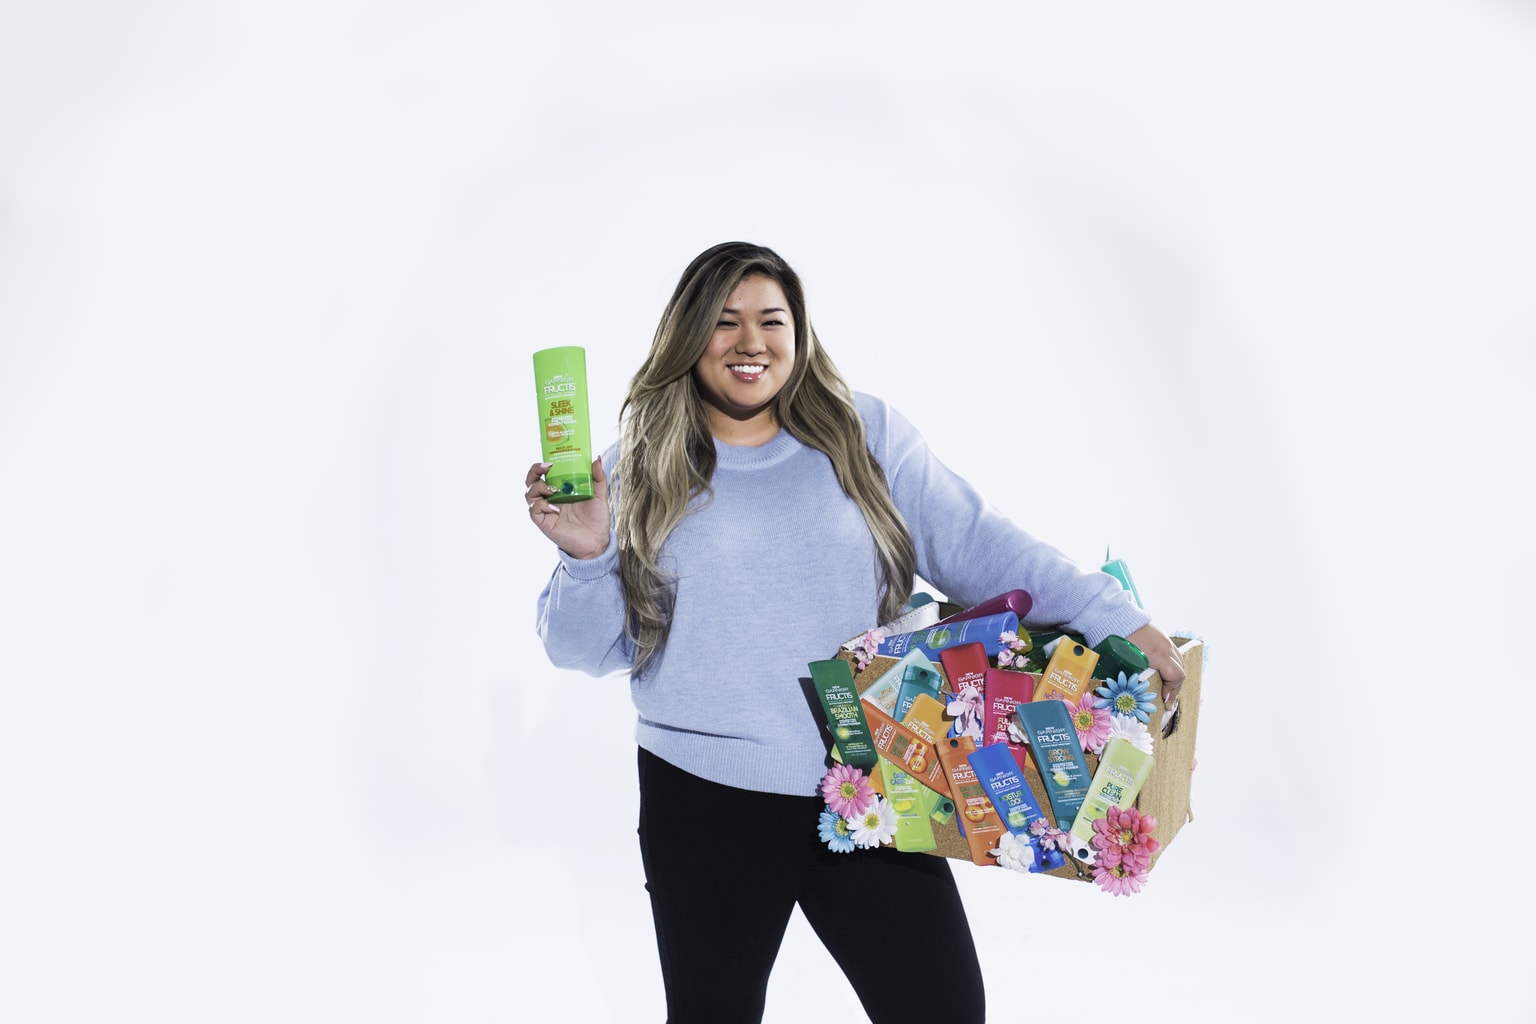 Garnier and DoSomething.org Rinse, Recycle, Repeat campaign